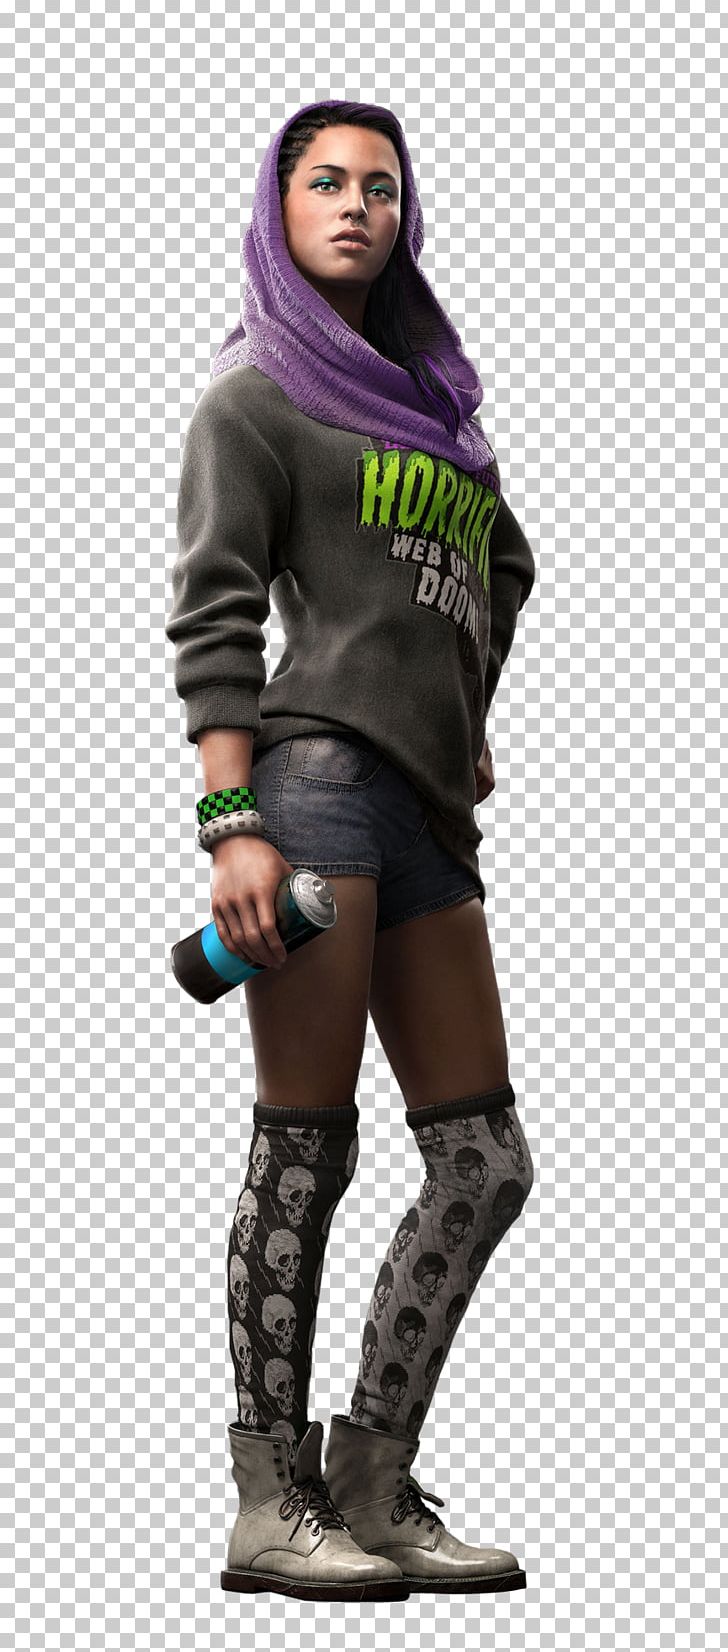 Watch Dogs 2 Sitara Costume PNG, Clipart, Clothing, Cosplay, Costume, Costume Party, Dog Free PNG Download